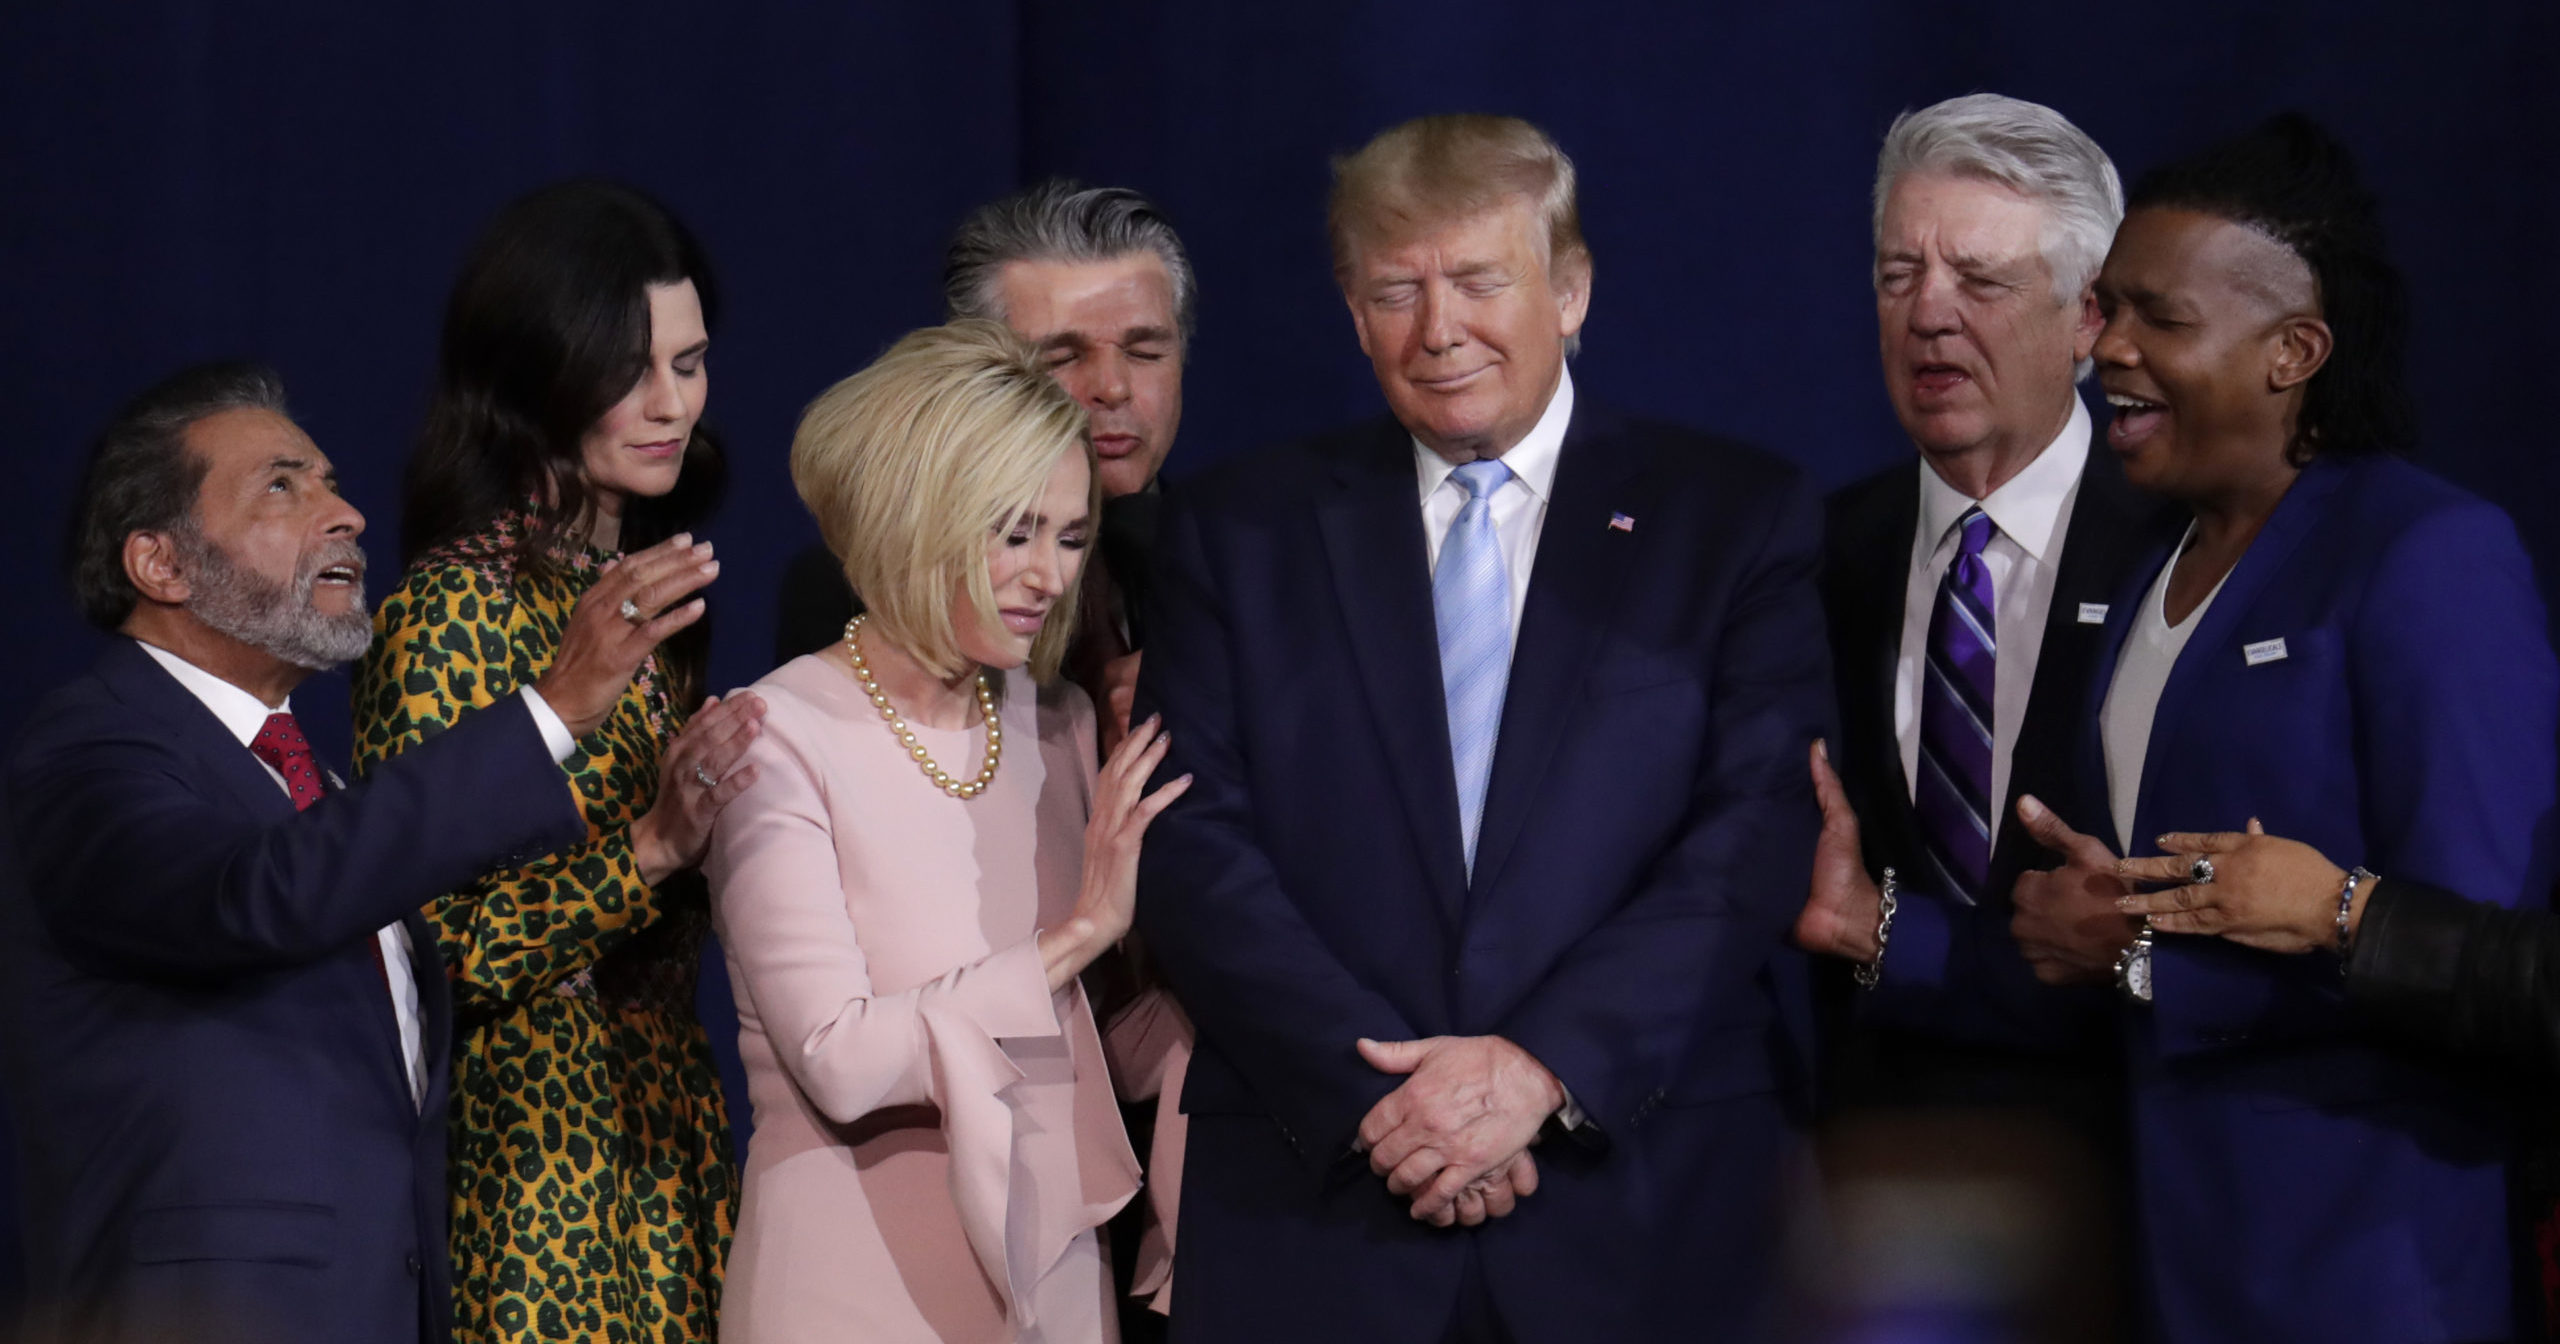 In this Jan. 3, 2020, file photo, faith leaders pray with President Donald Trump during a rally for evangelical supporters at the King Jesus International Ministry church in Miami.